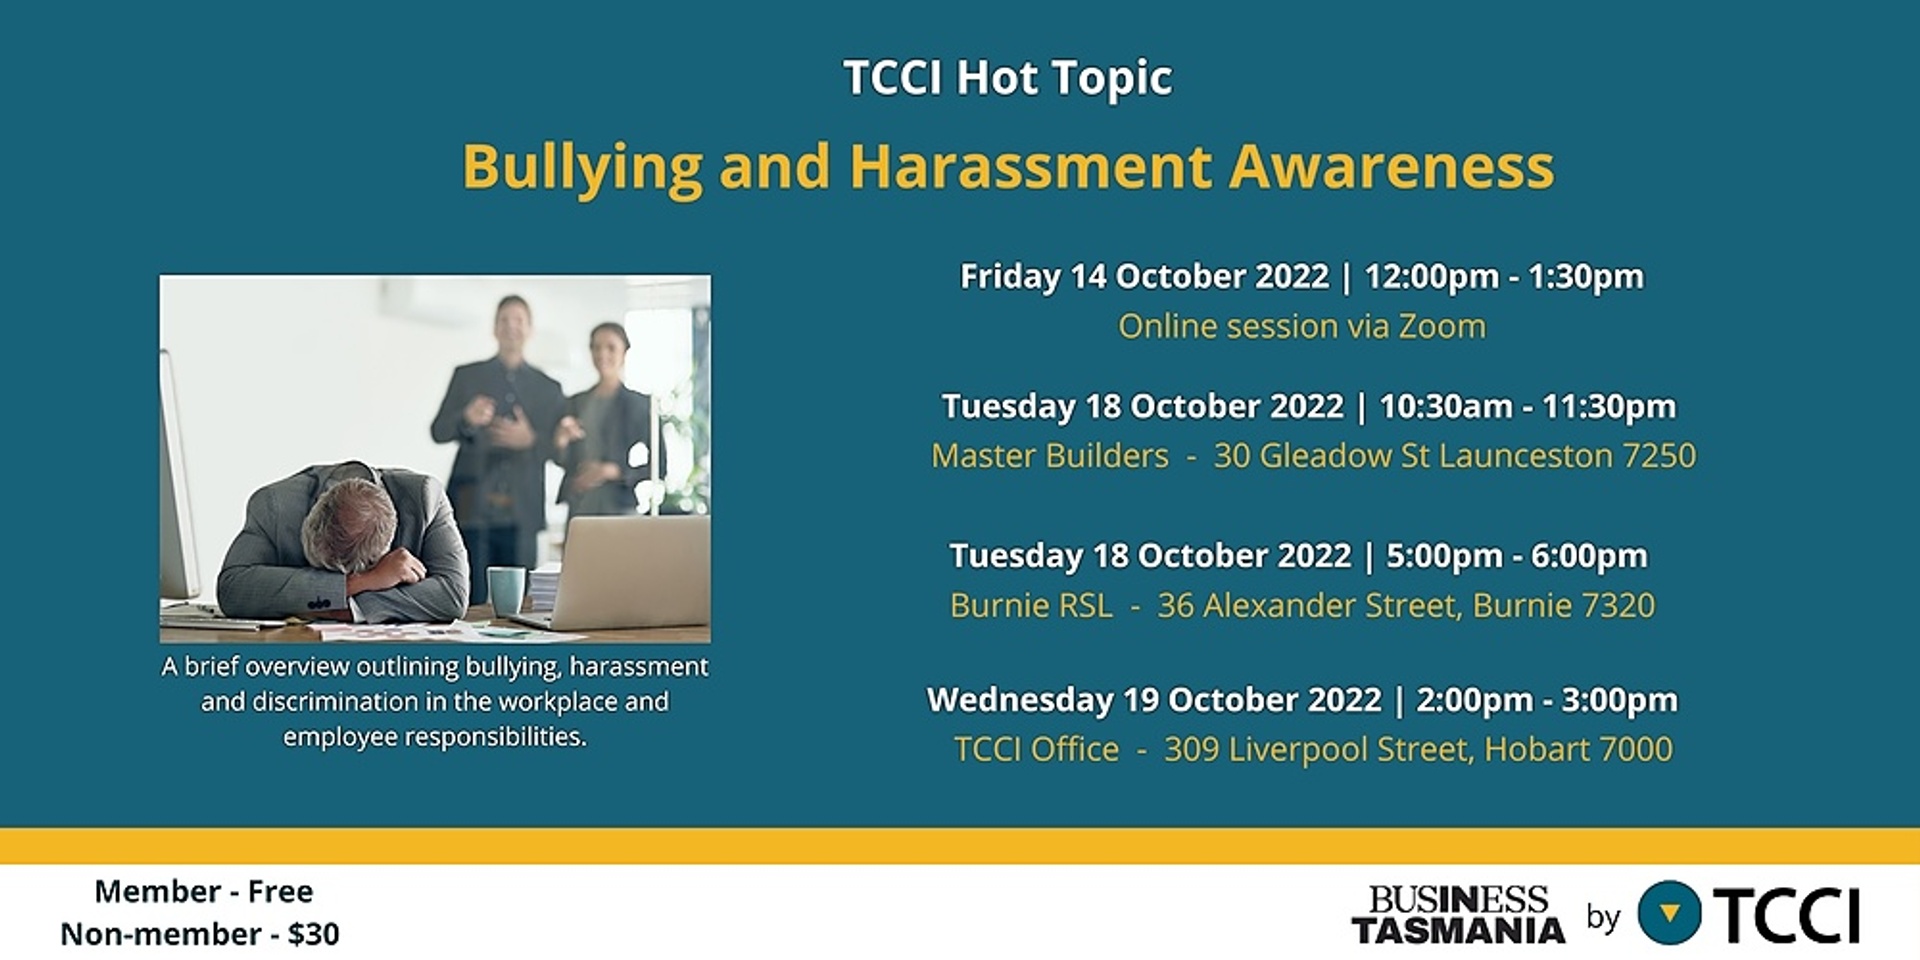 TCCI Hot Topic - Bullying and Harassment (Online)